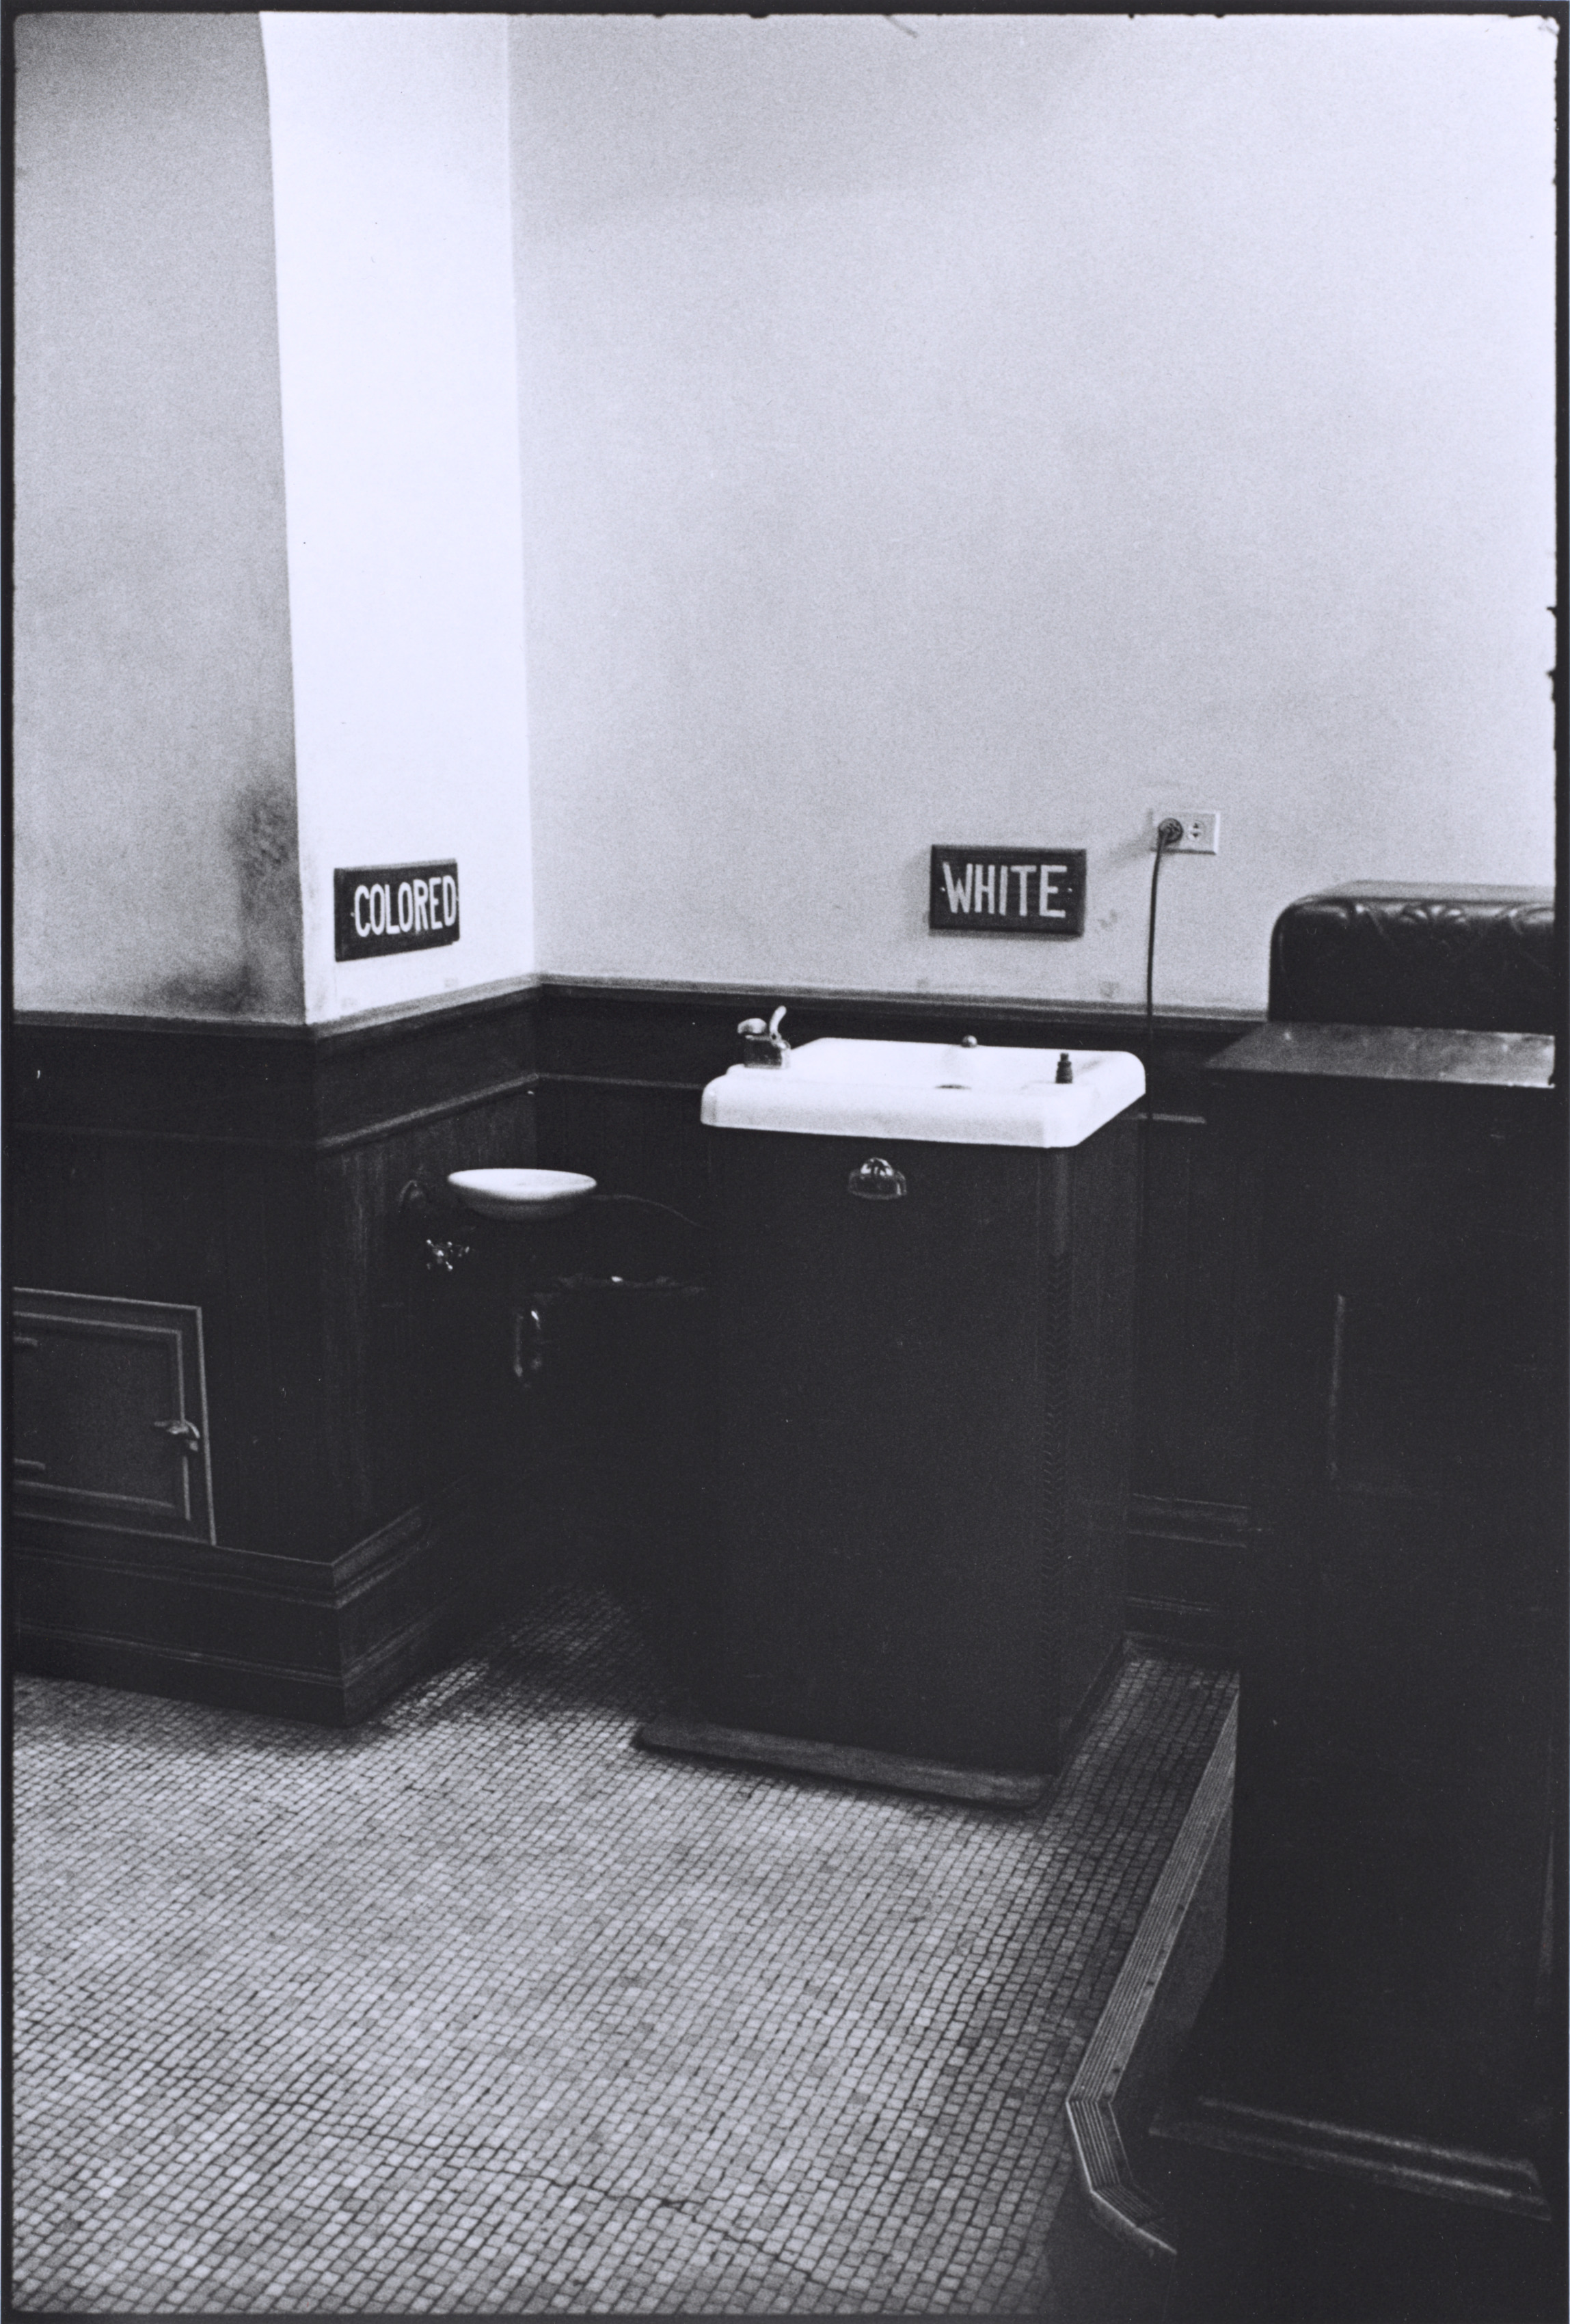 Segregated drinking fountains in the county courthouse in Albany, Georgia